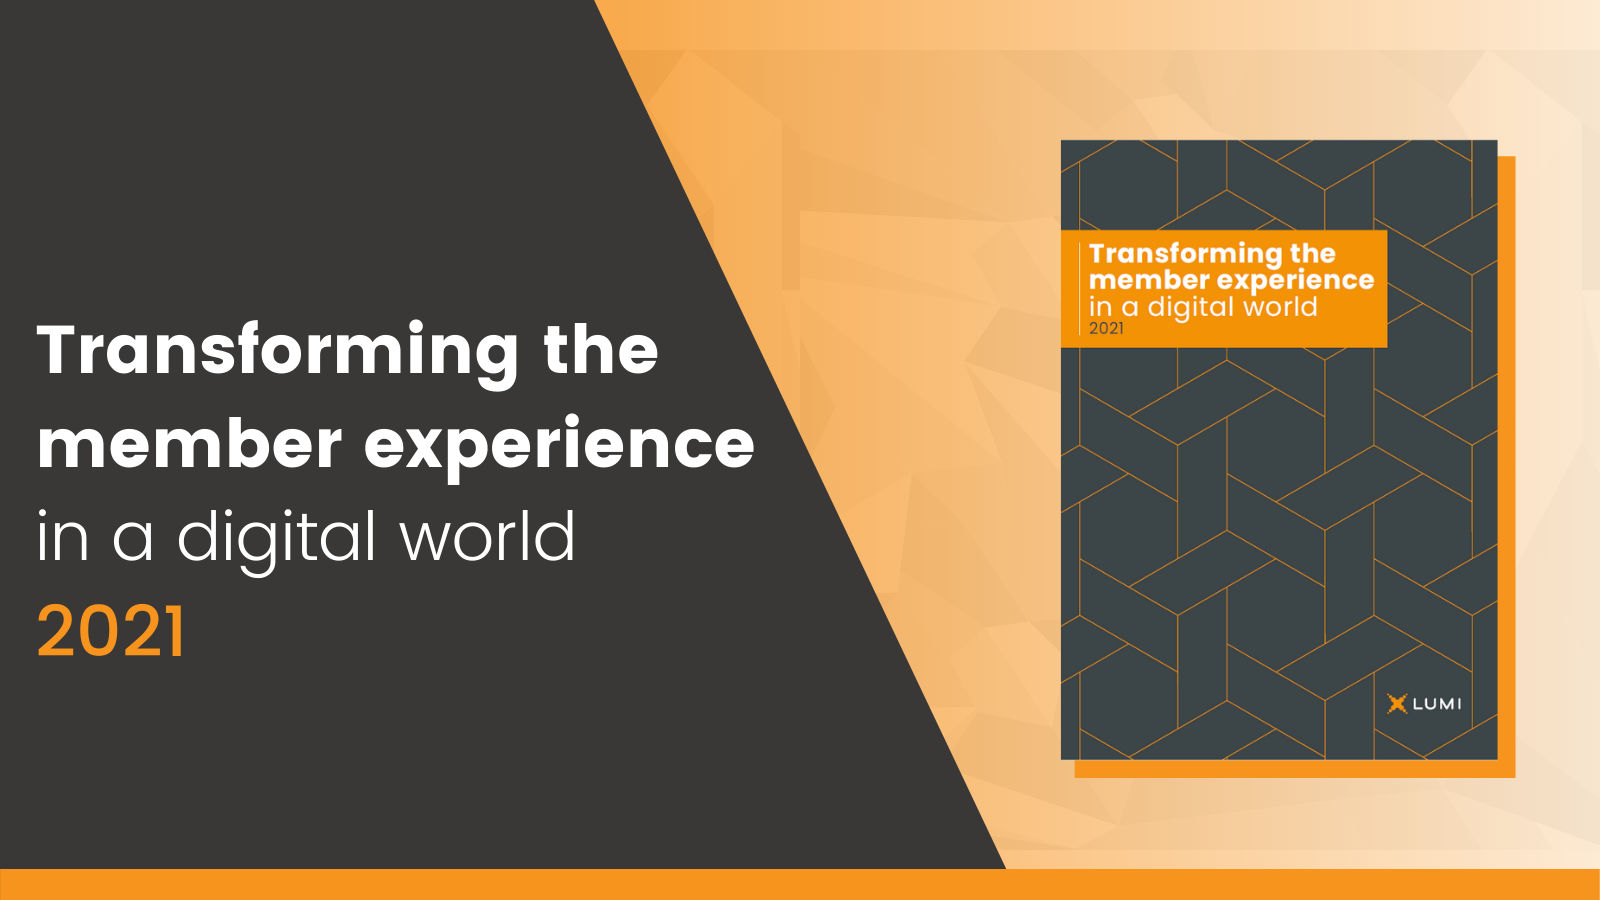 Report: Transforming the member experience in a digital world 2021